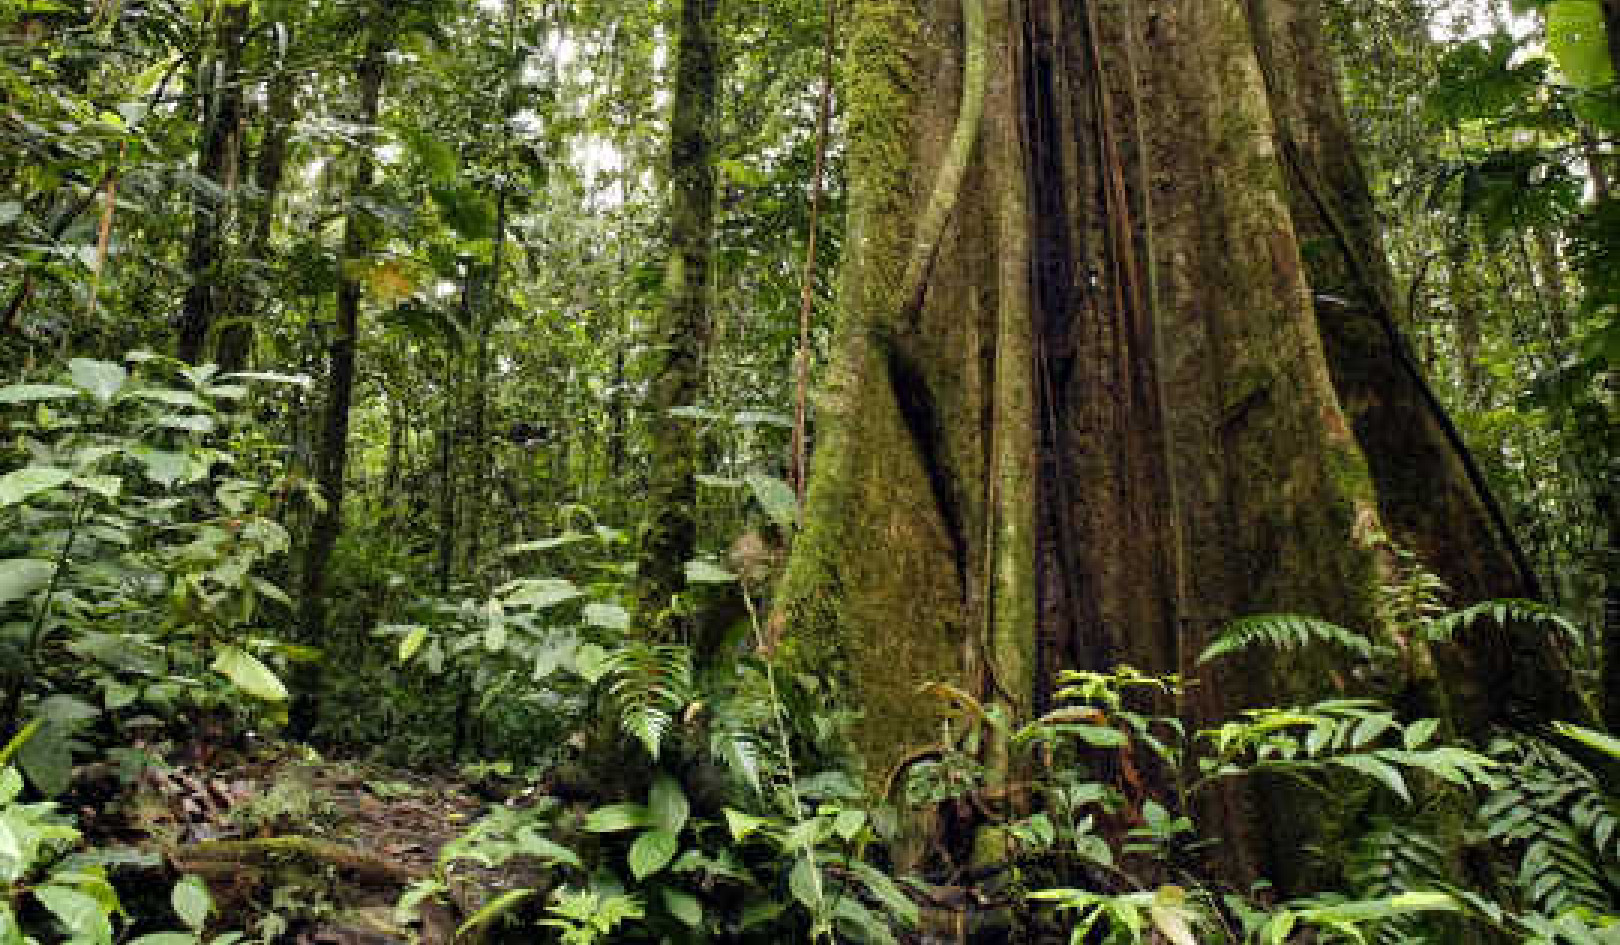 Is The Amazon Rainforest On The Verge Of Collapse?